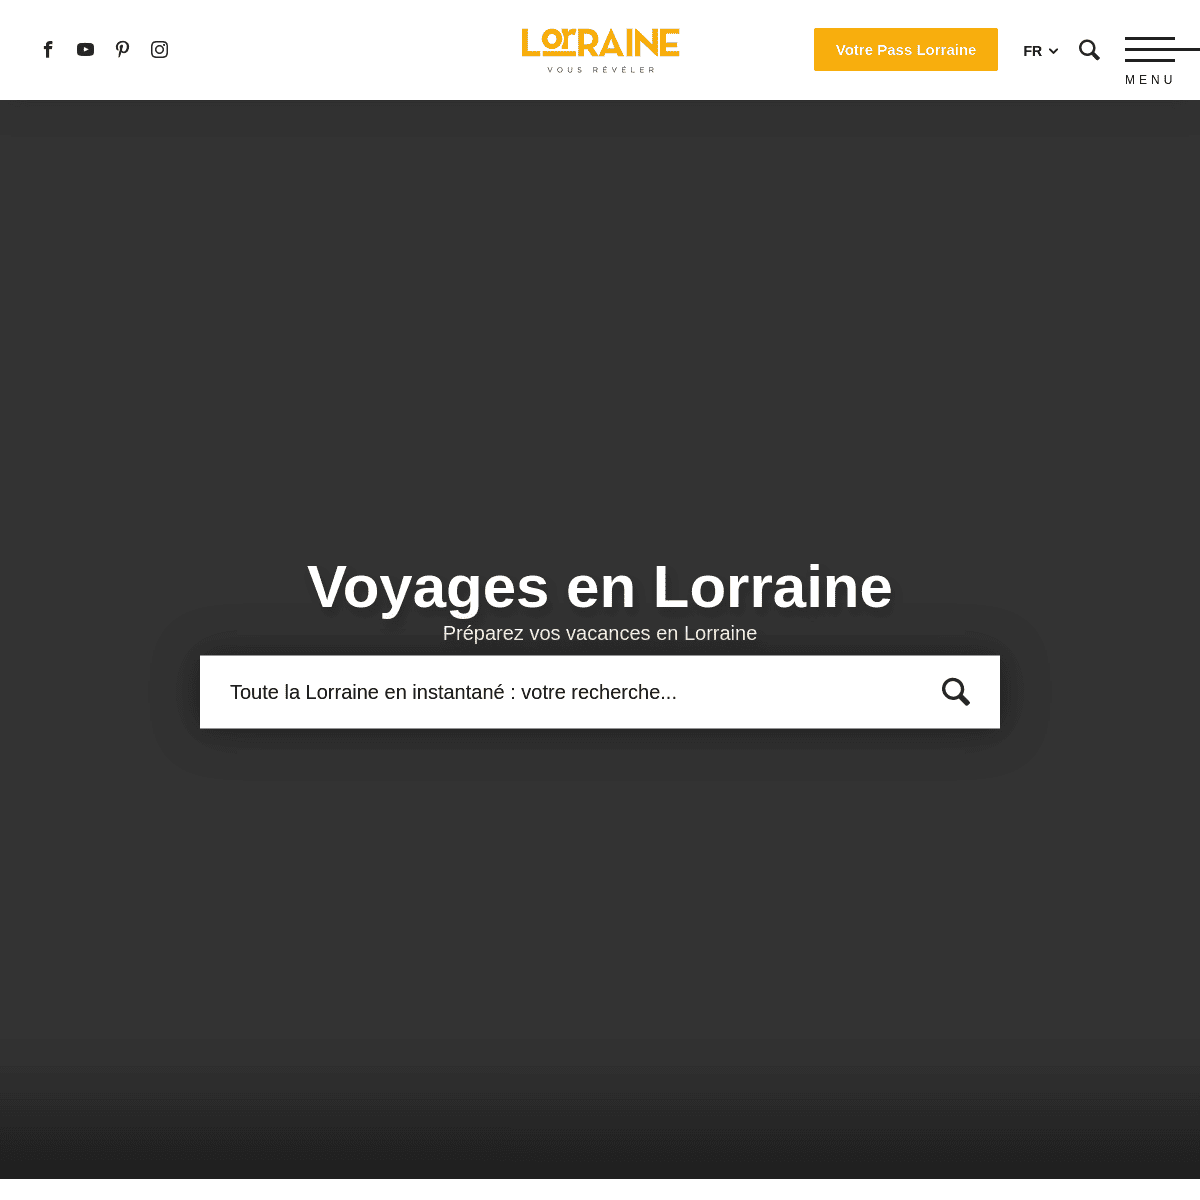 A complete backup of https://tourisme-lorraine.fr